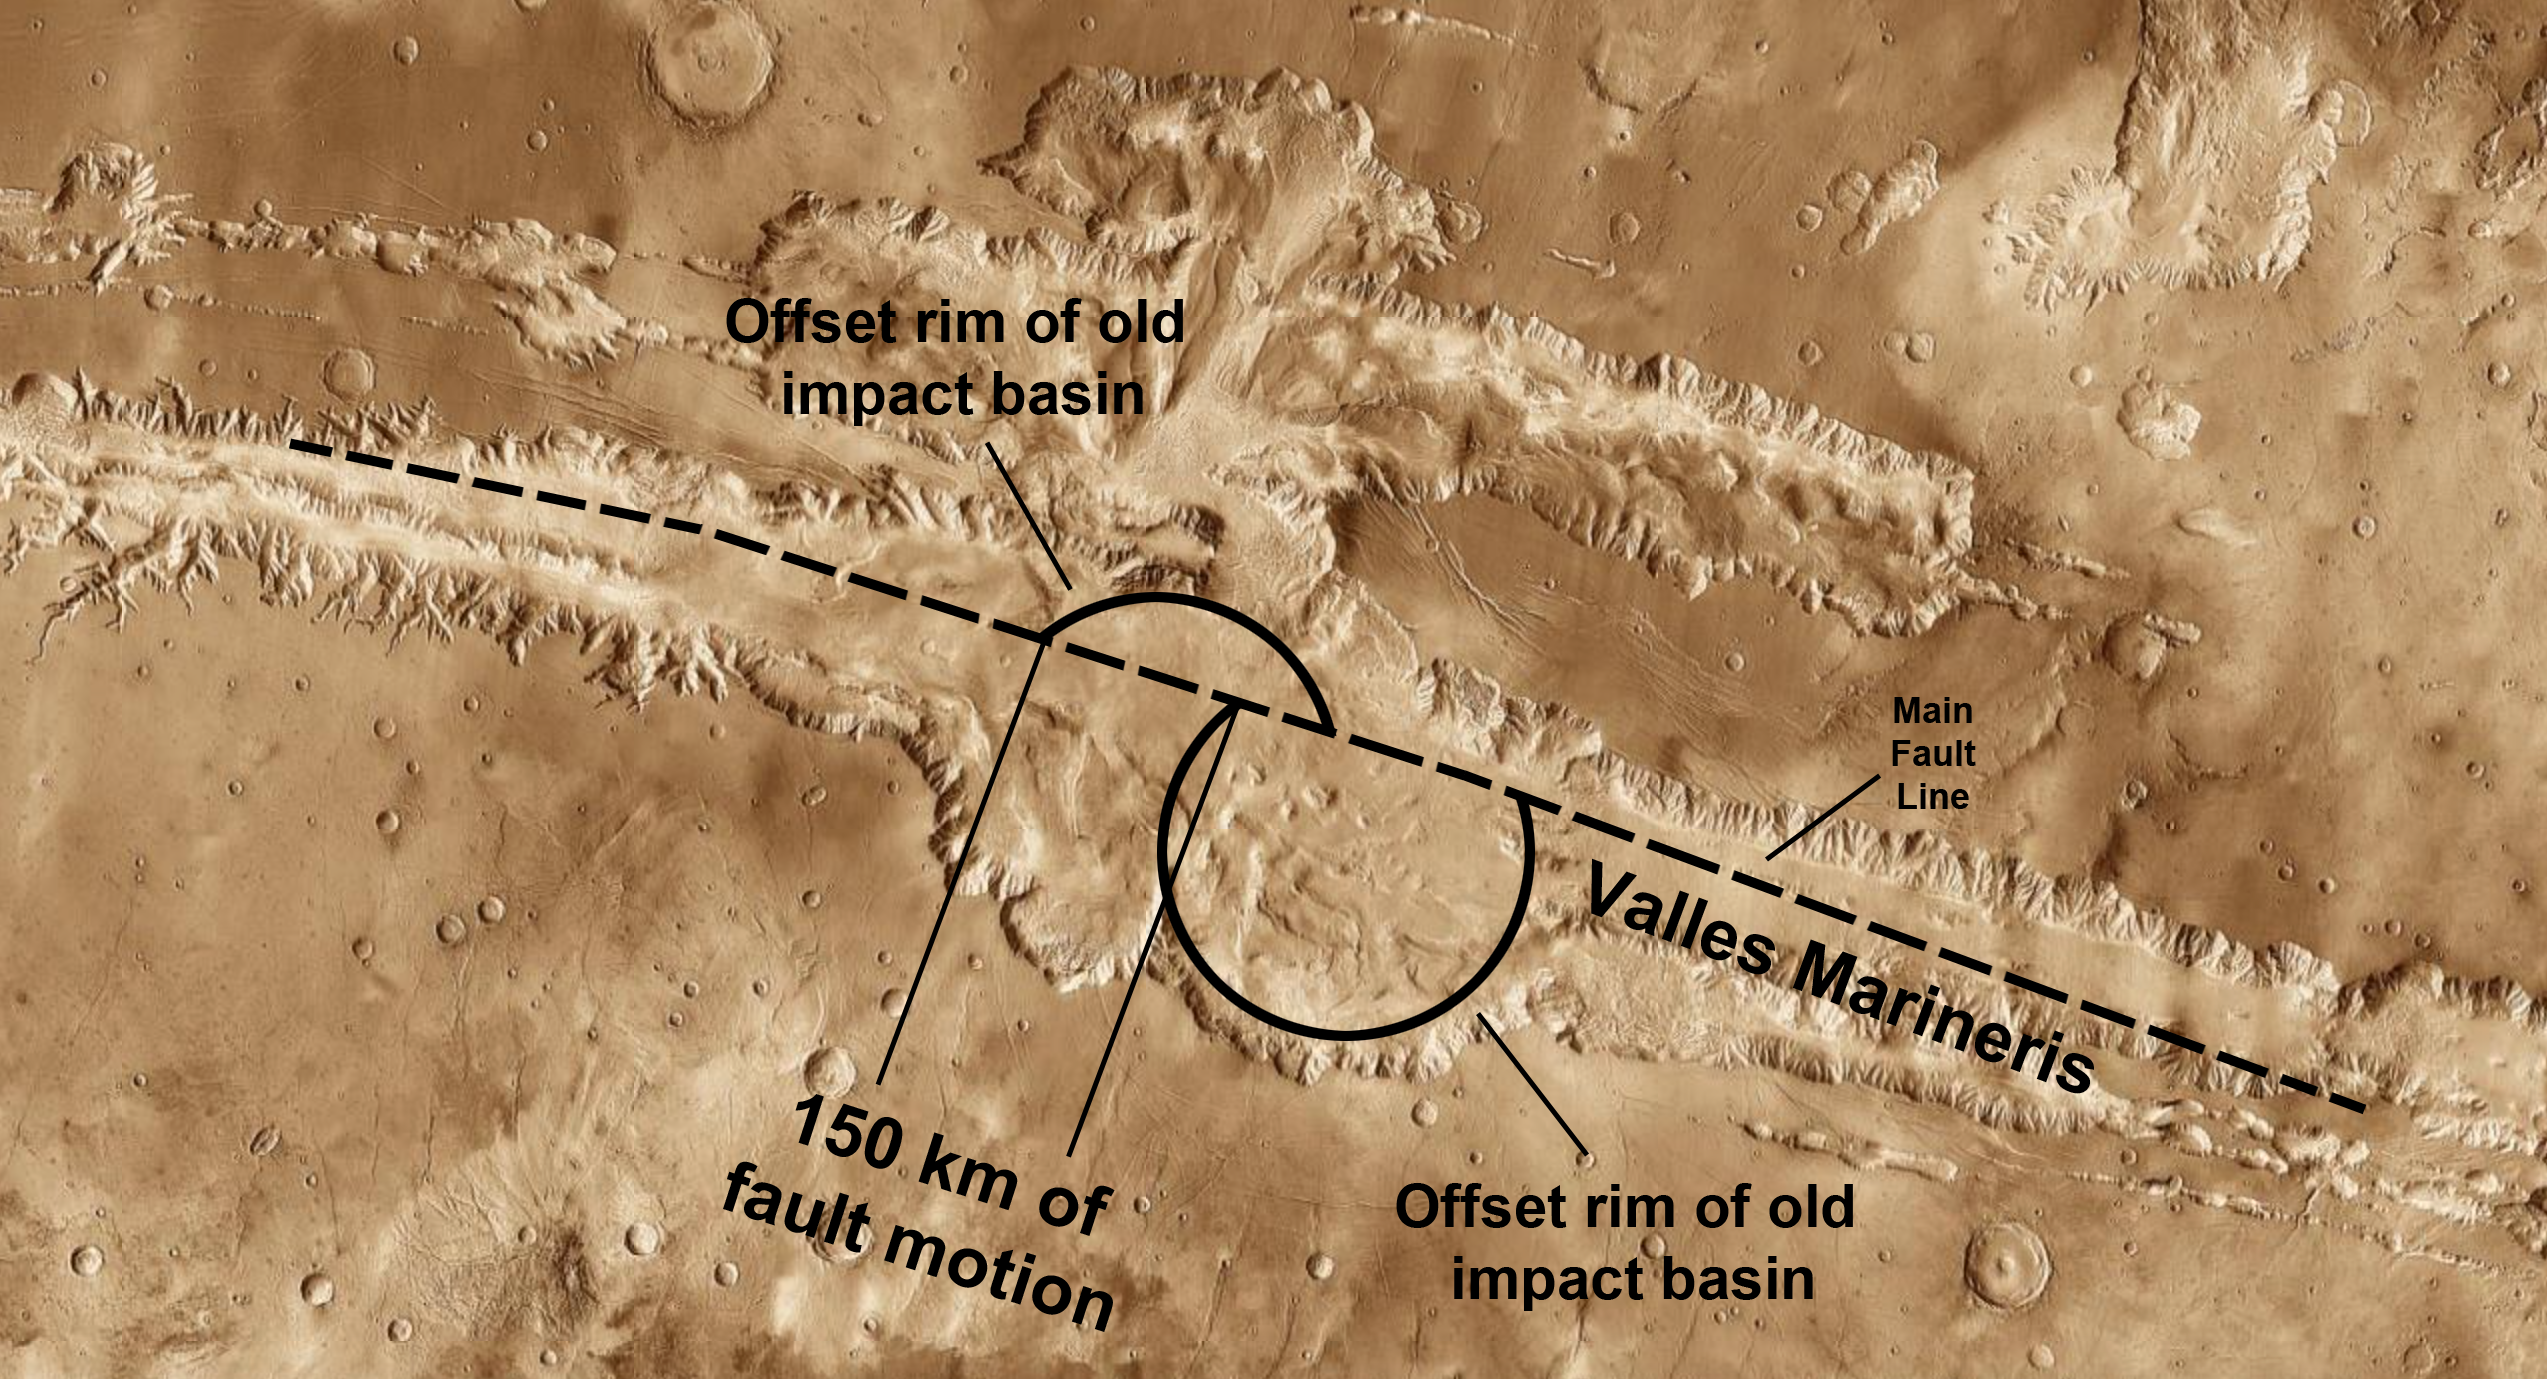     A diagram showing the location of a rover on Mars, exploring the grand canyon.